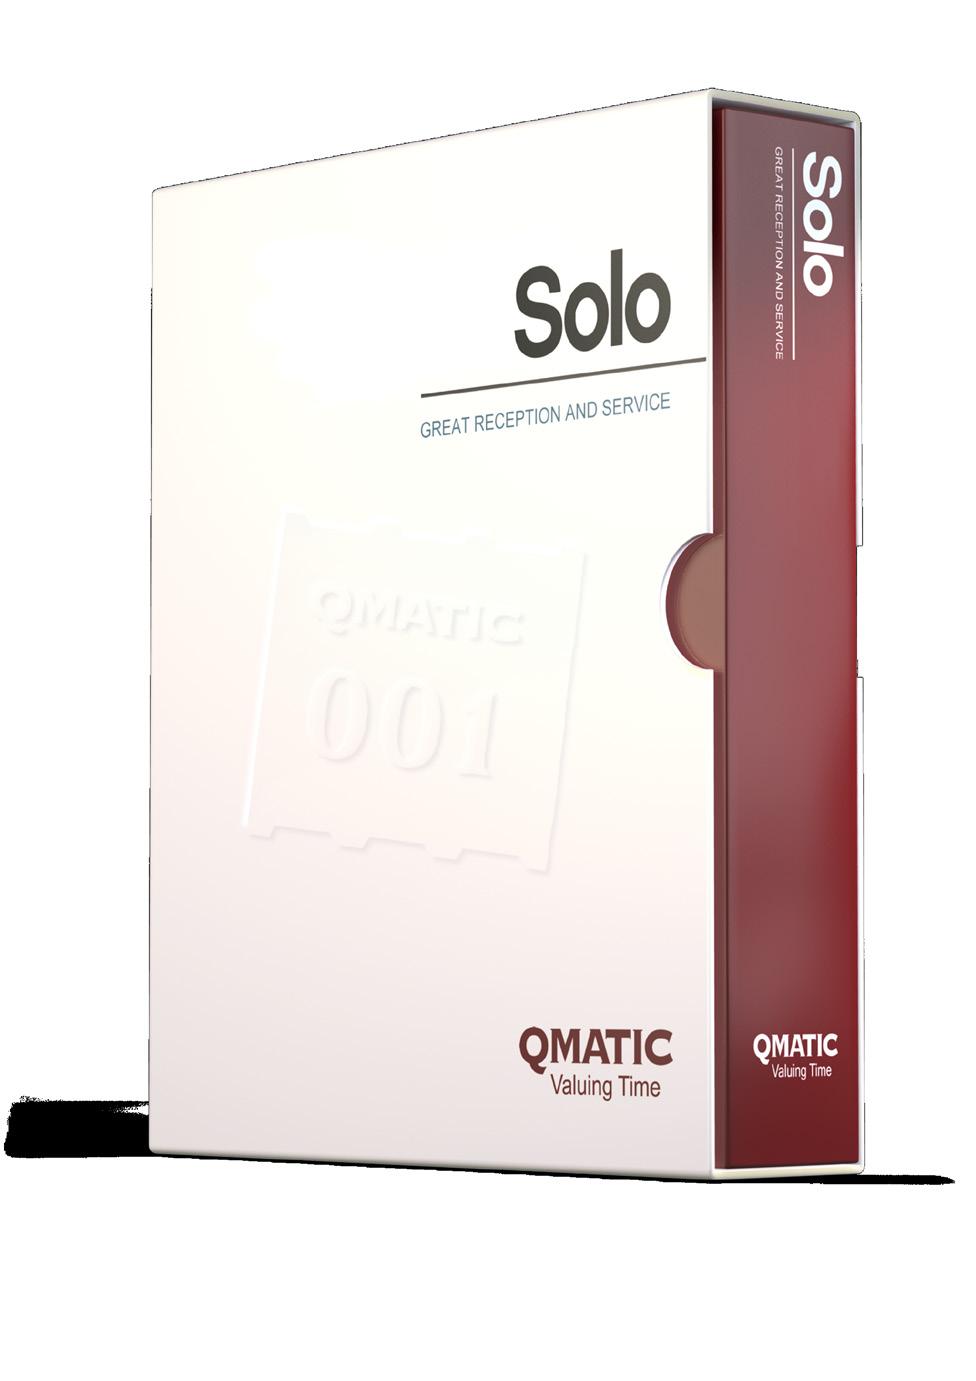 SOFTWARE Solo The Qmatic Solo solution is a perfect match to control the customer flow and to support customer service staff in any environment.